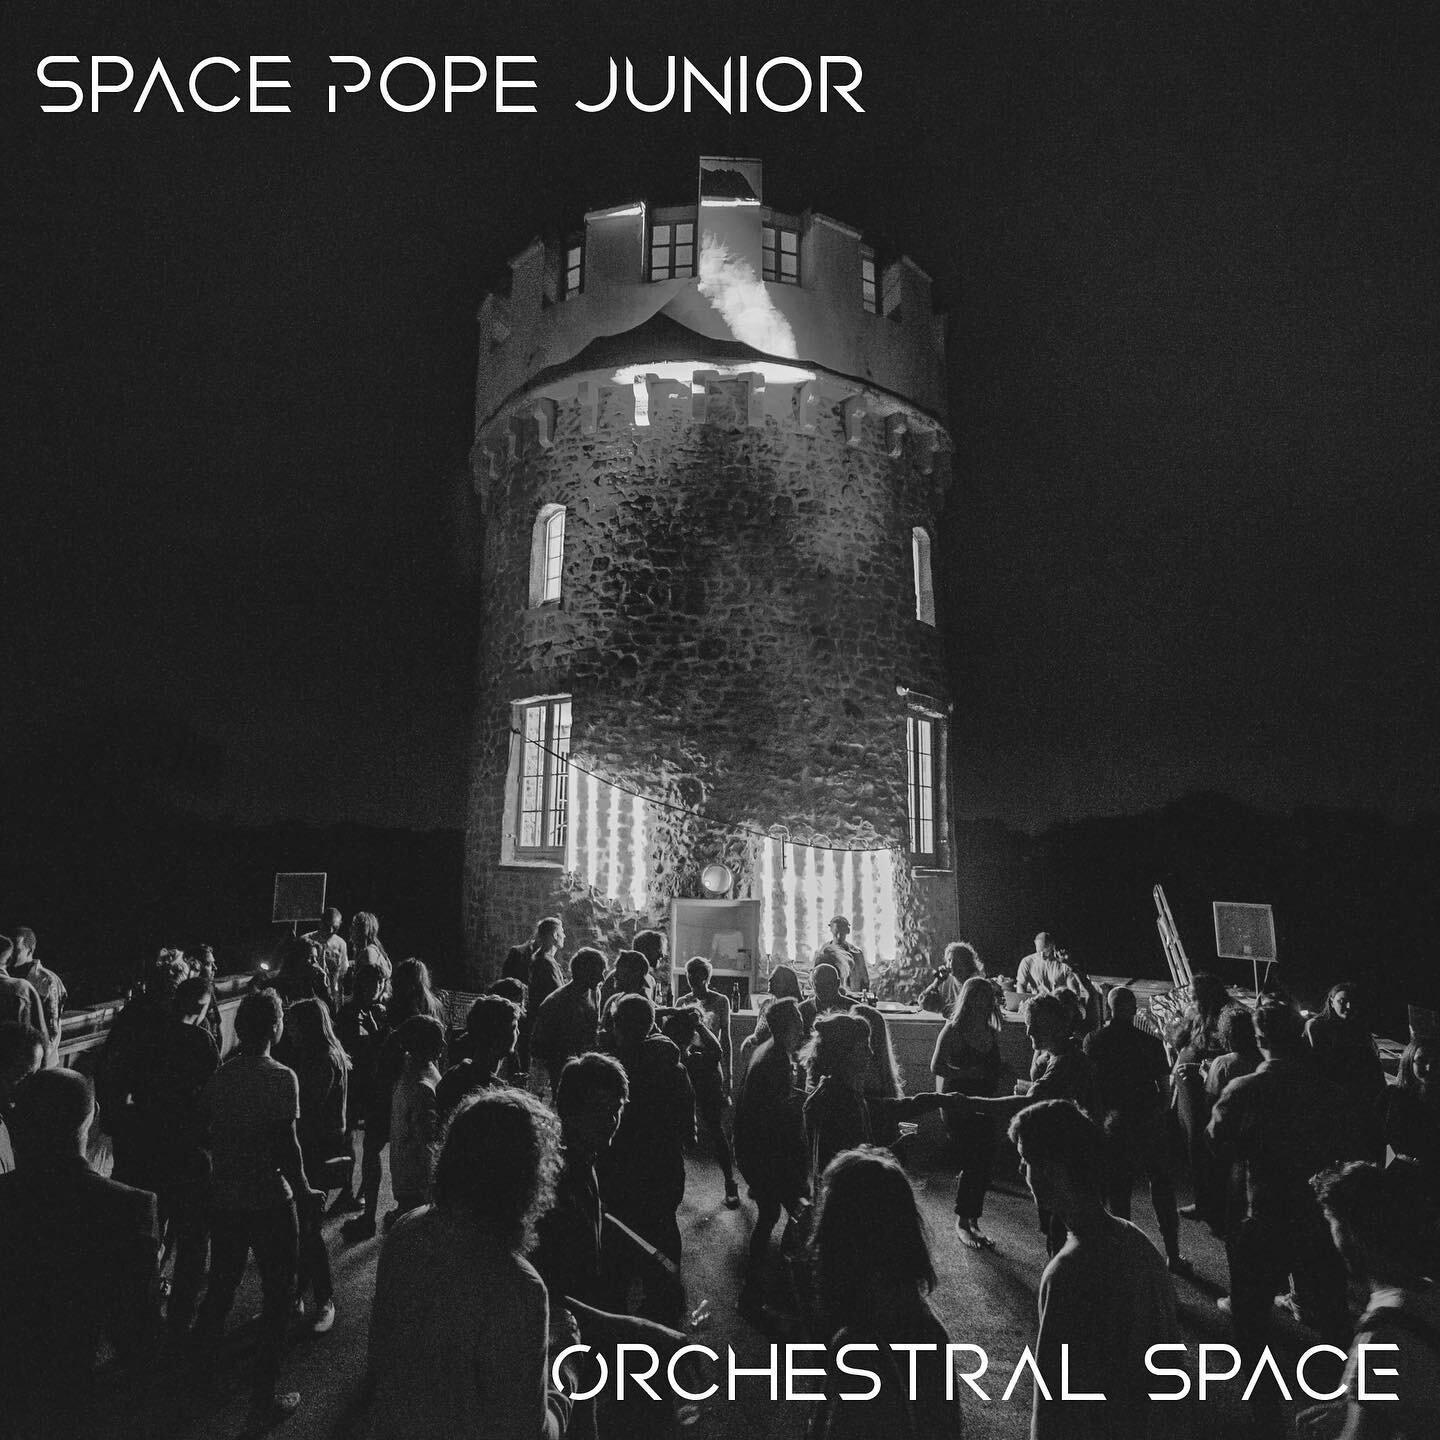 My &lsquo;Orchestral Space EP&rsquo; is out now. You can listen or watch on all major platforms.

Special thanks to @jschen.music for collaborating on the orchestral movements and @rollercoaster_music for their sonic additions. 

Photo by @ania_shrim